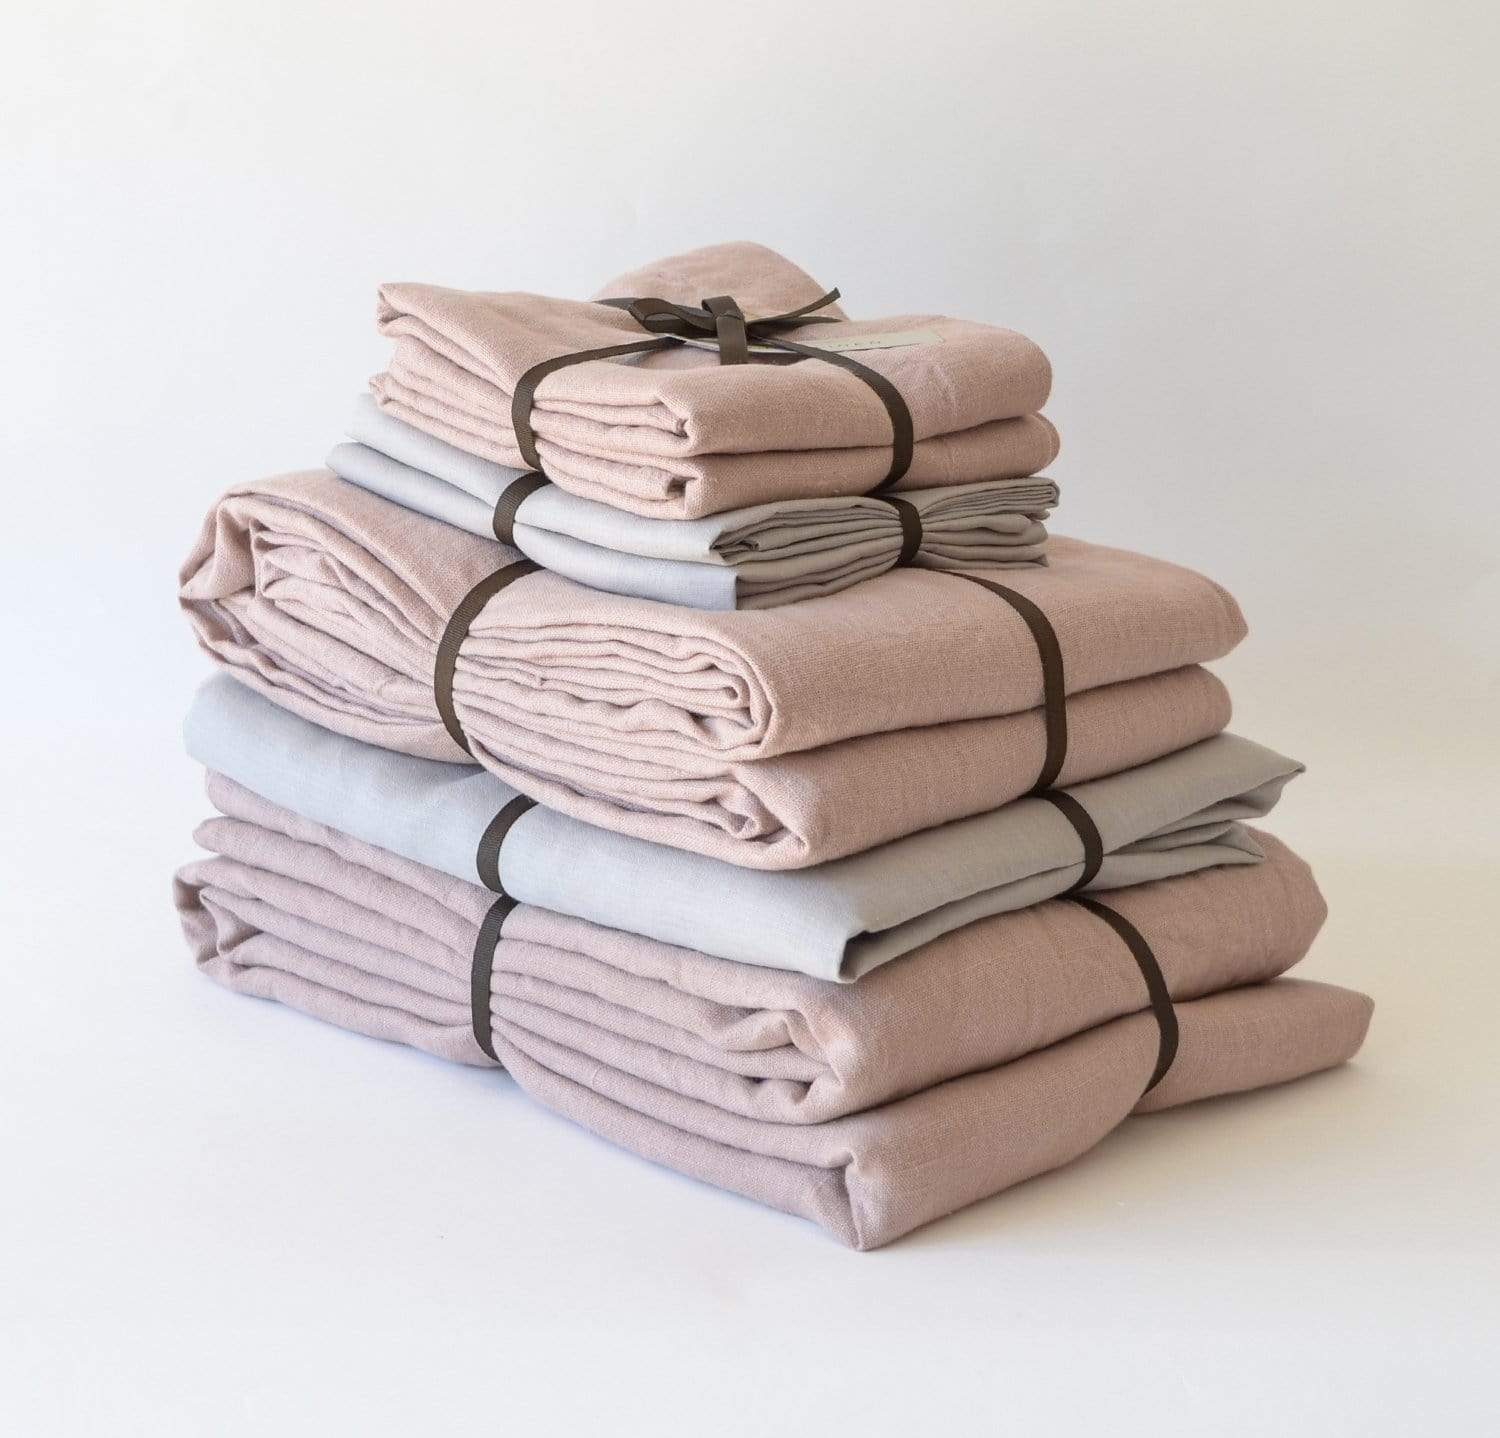 Under The Canopy Linen Tea Towel - Natural Natural / One Towel